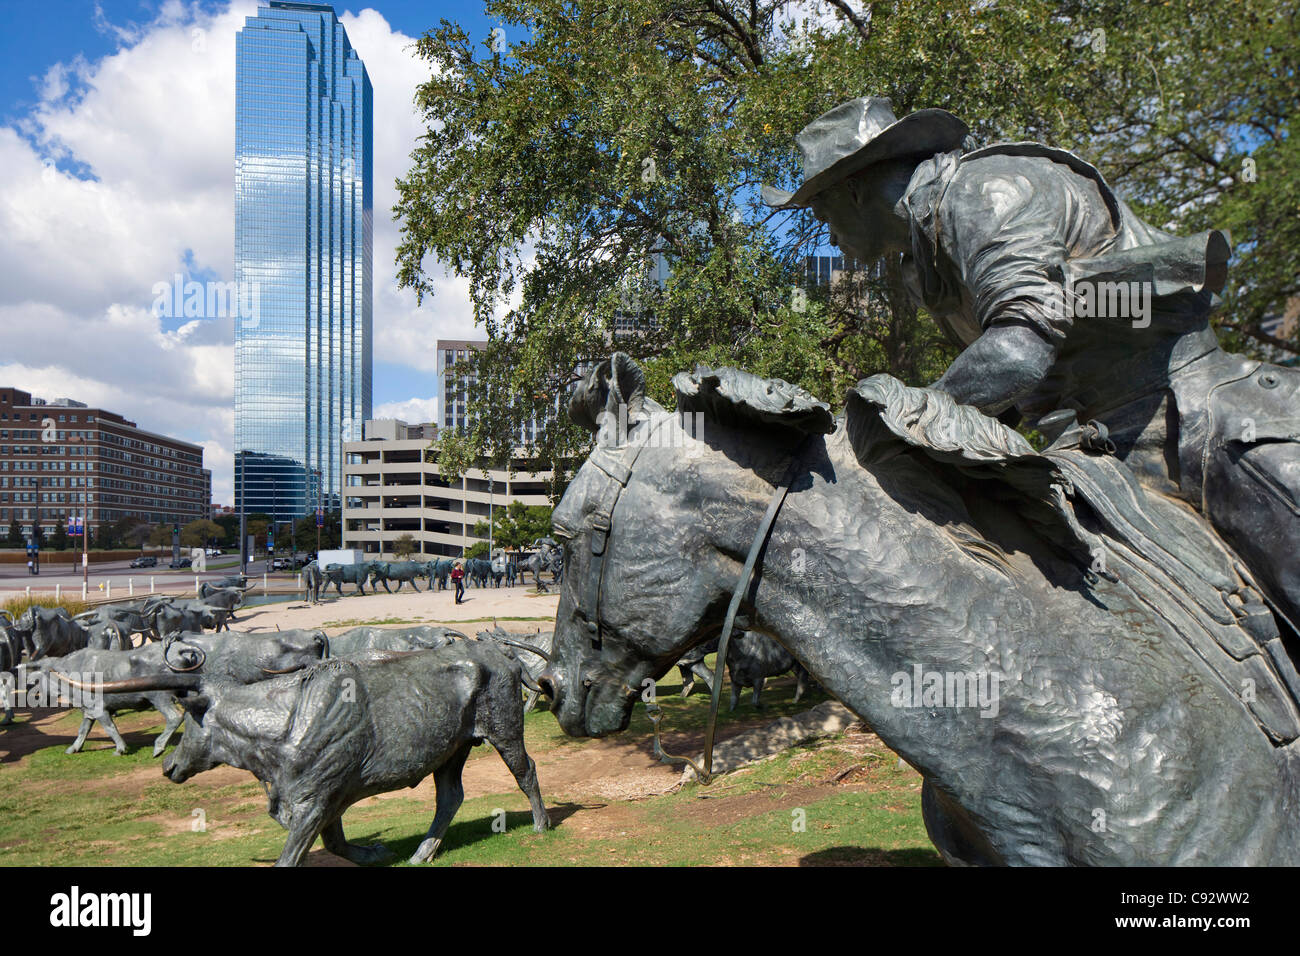 Trail Rider, a part of the Cattle Drive sculptures in Pioneer Plaza, Dallas, Texas, USA Stock Photo